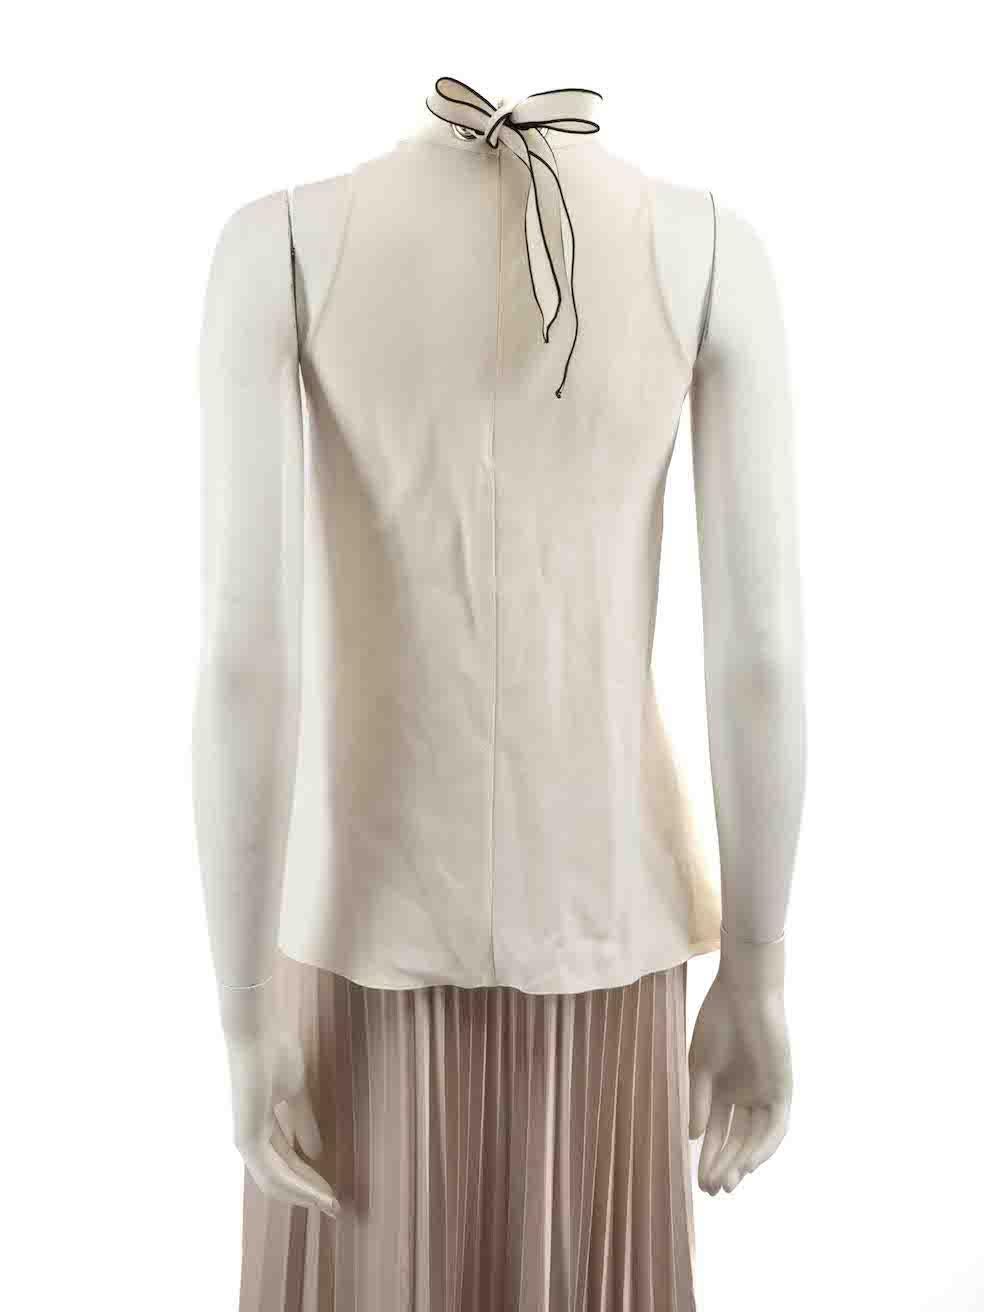 Proenza Schouler Ecru Bow Detail Sleeveless Top Size XXS In Good Condition For Sale In London, GB